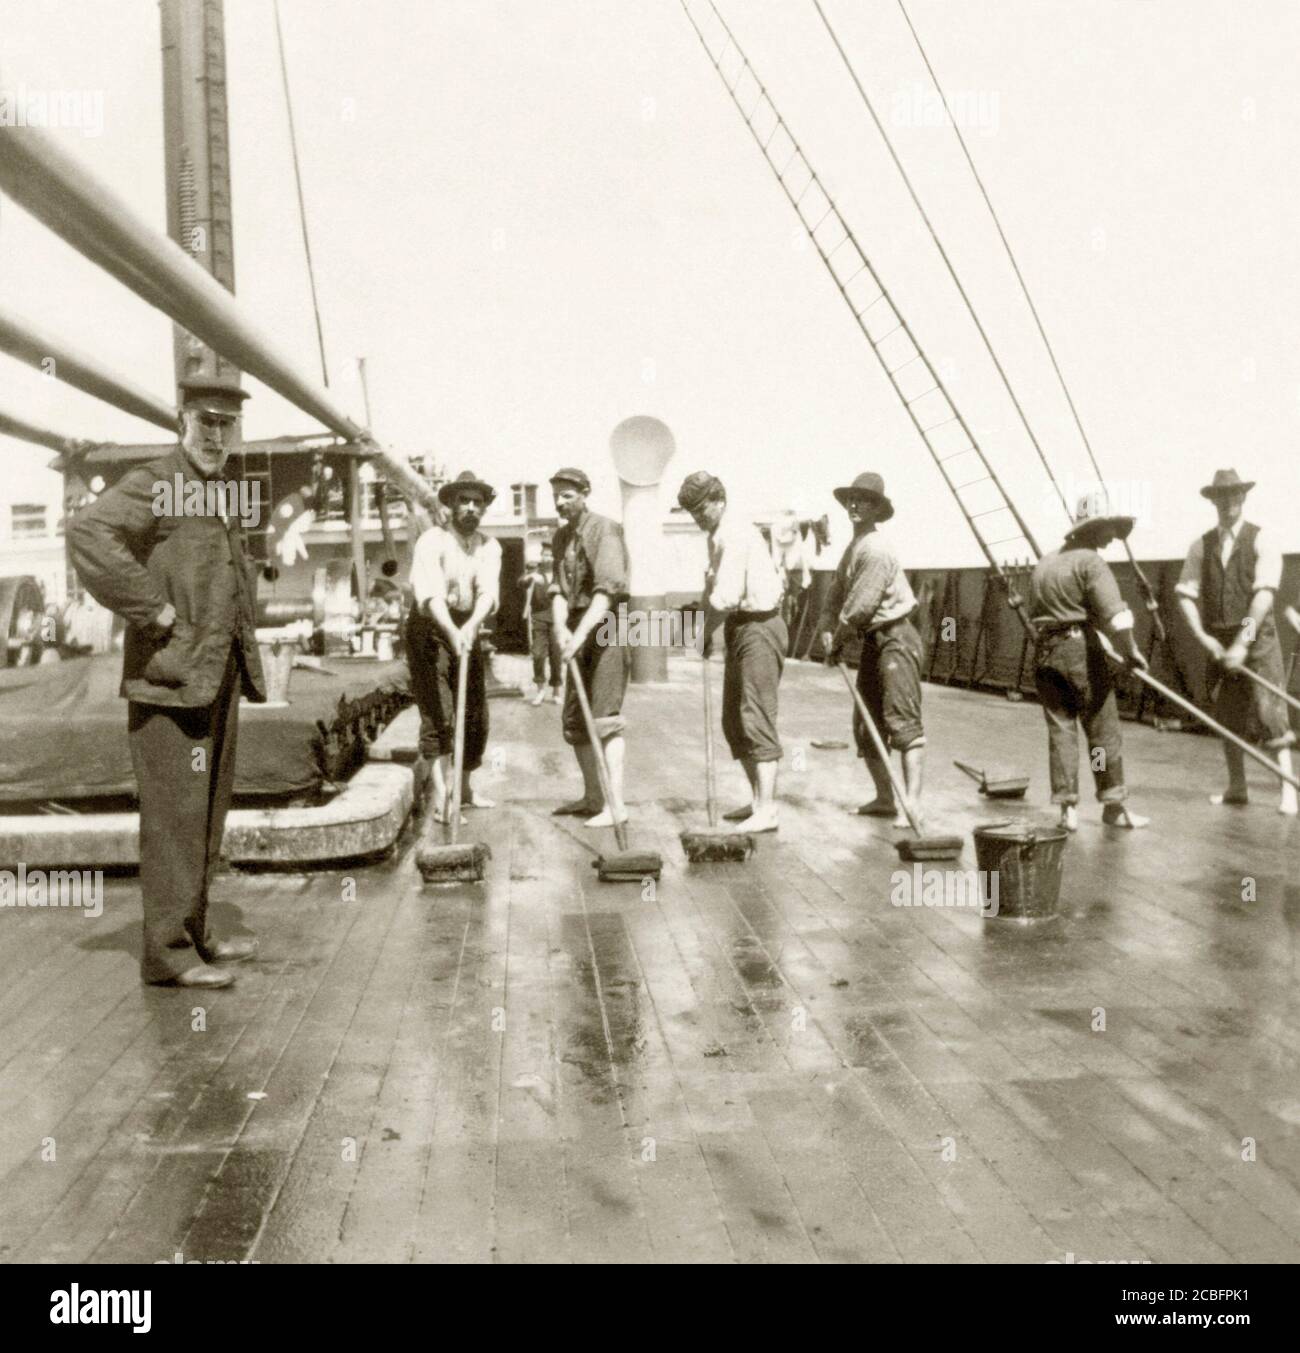 Sailors swabbing down and cleaning the decks of the ship 'Bancoora' whilst moored in Sydney Harbour, NSW, Australia c. 1910 The 'Bancoora' was built in Glasgow in 1880. It weighed 2880 tons. She was was stranded near Torquay, Victoria, Australia in 1893 but was re-floated. This image is from a very small and retouched print in an old Australian photograph album. Stock Photo